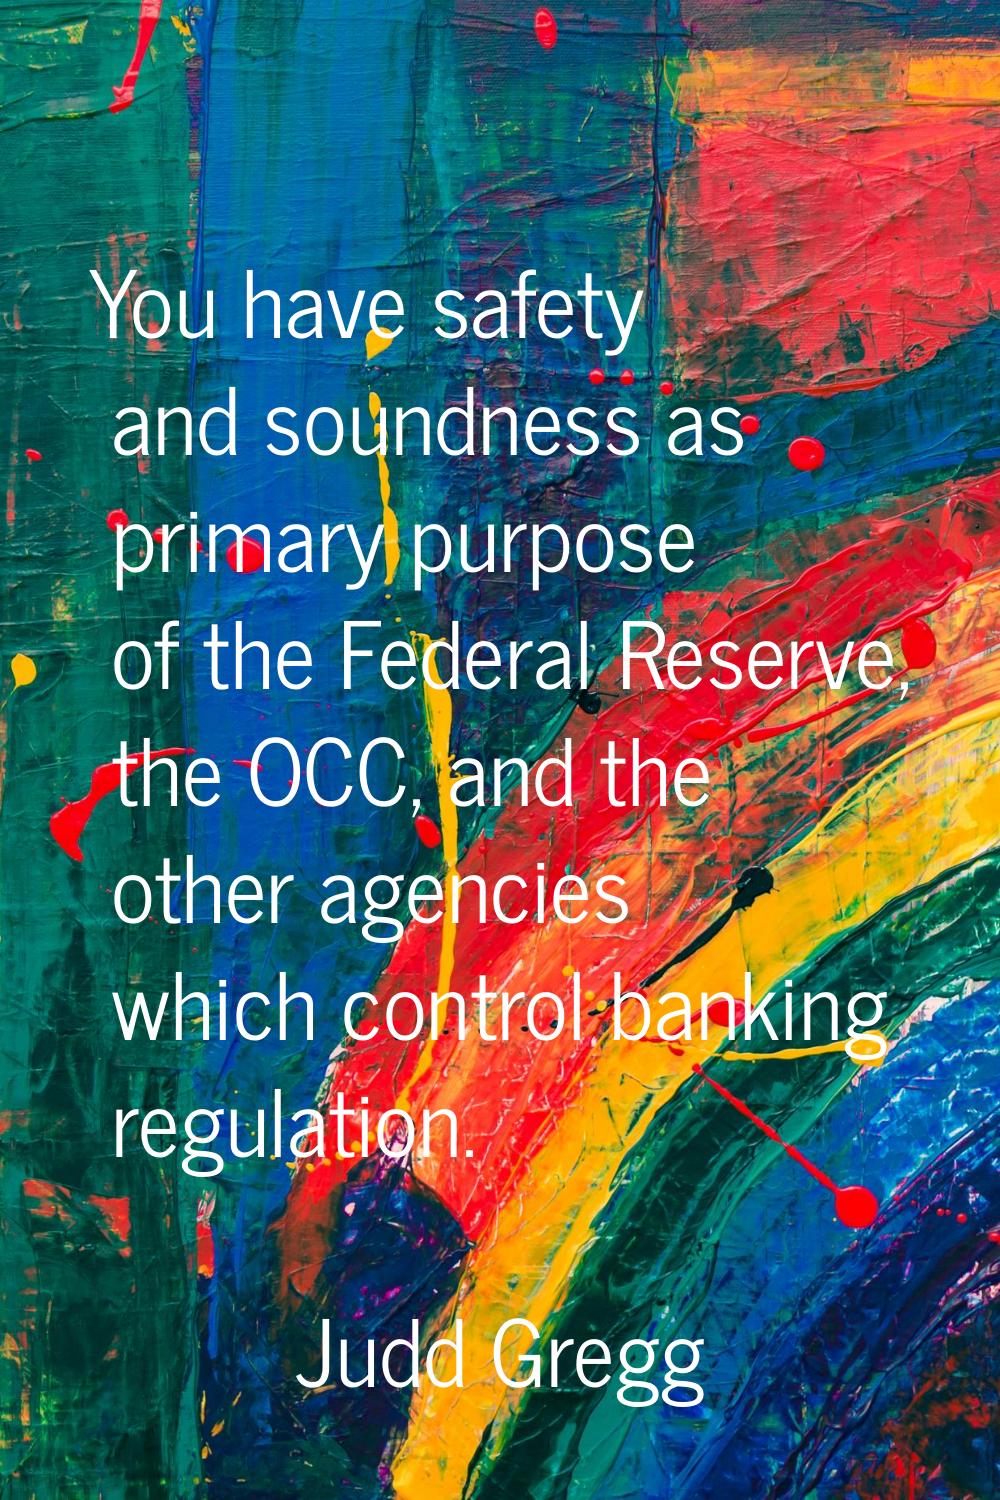 You have safety and soundness as primary purpose of the Federal Reserve, the OCC, and the other age